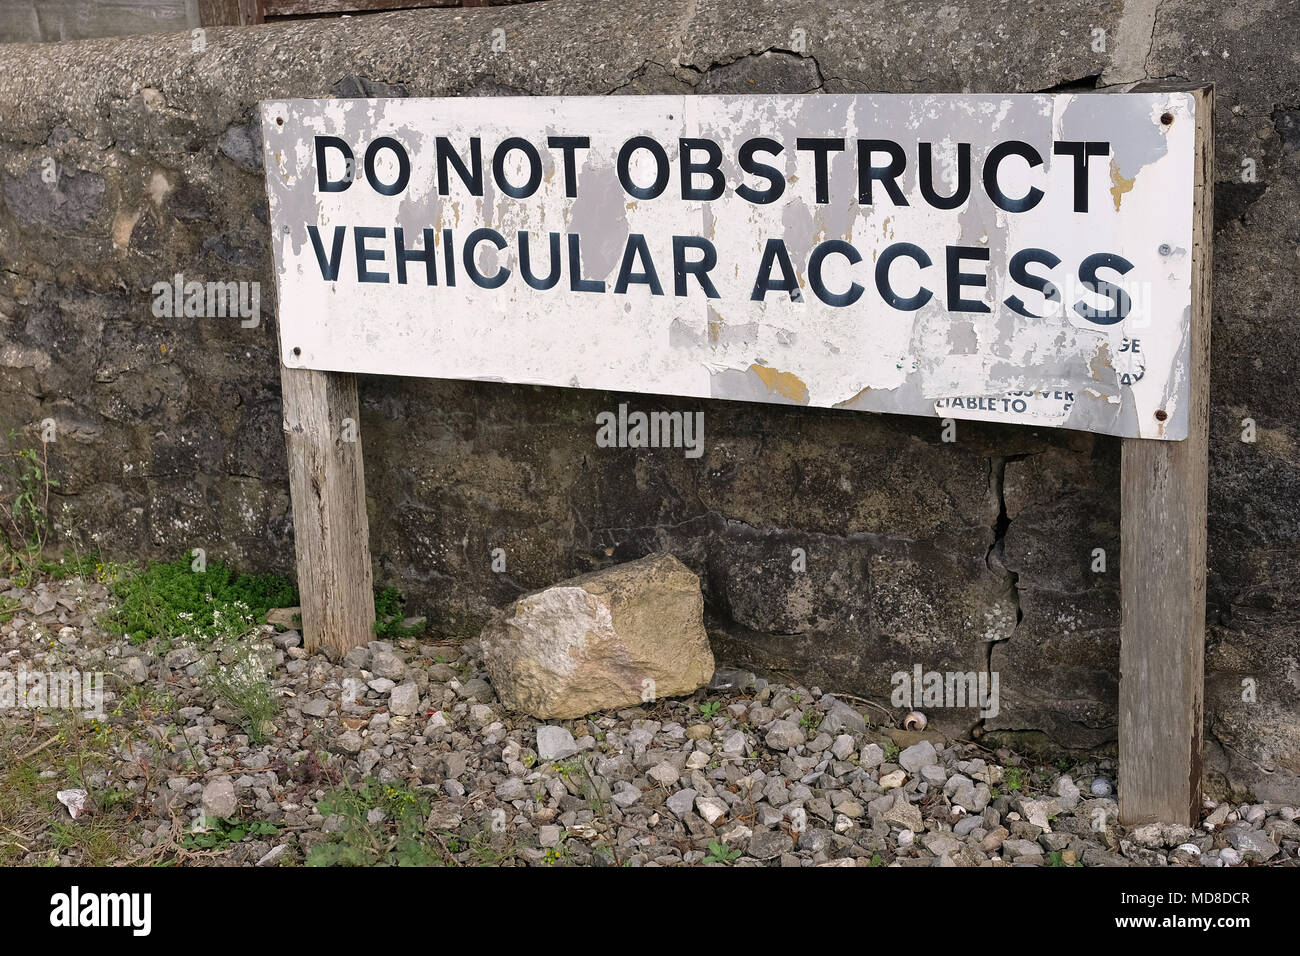 April 2014 - Public sign  - Do not obstruct vehicular access in Portishead, North Somerset. Stock Photo